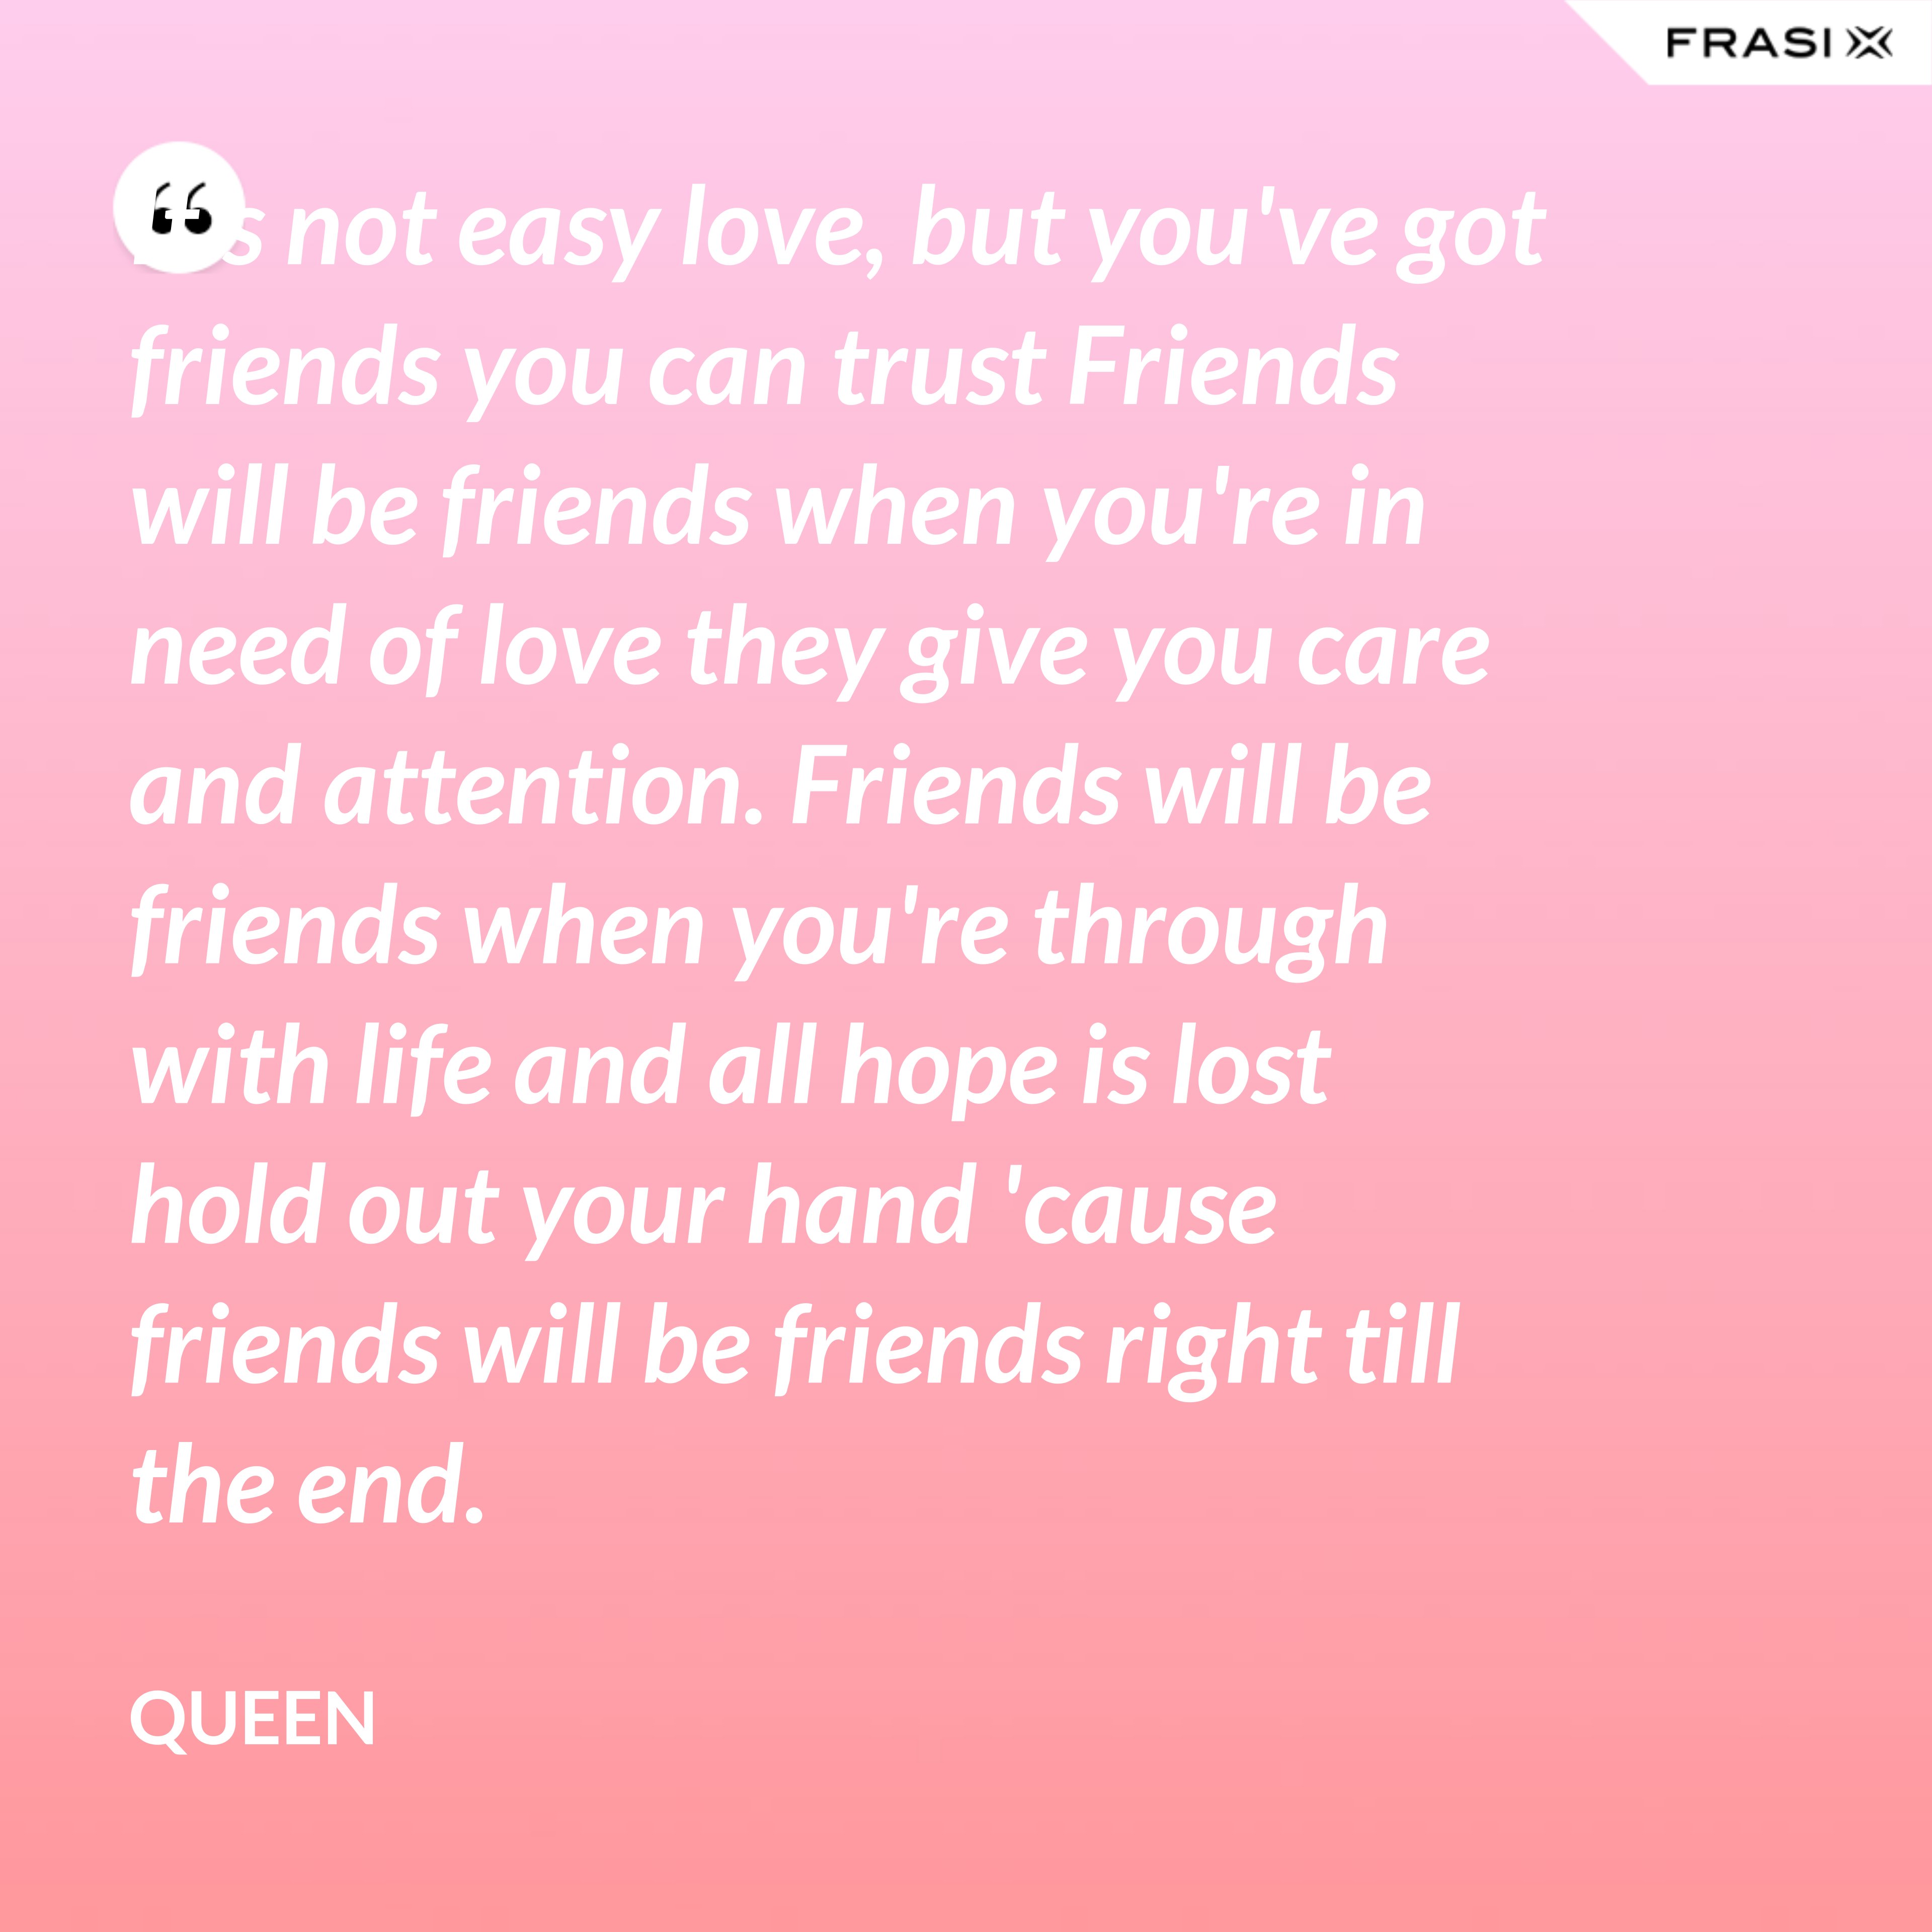 It's not easy love, but you've got friends you can trust Friends will be friends when you're in need of love they give you care and attention. Friends will be friends when you're through with life and all hope is lost hold out your hand 'cause friends will be friends right till the end. - Queen